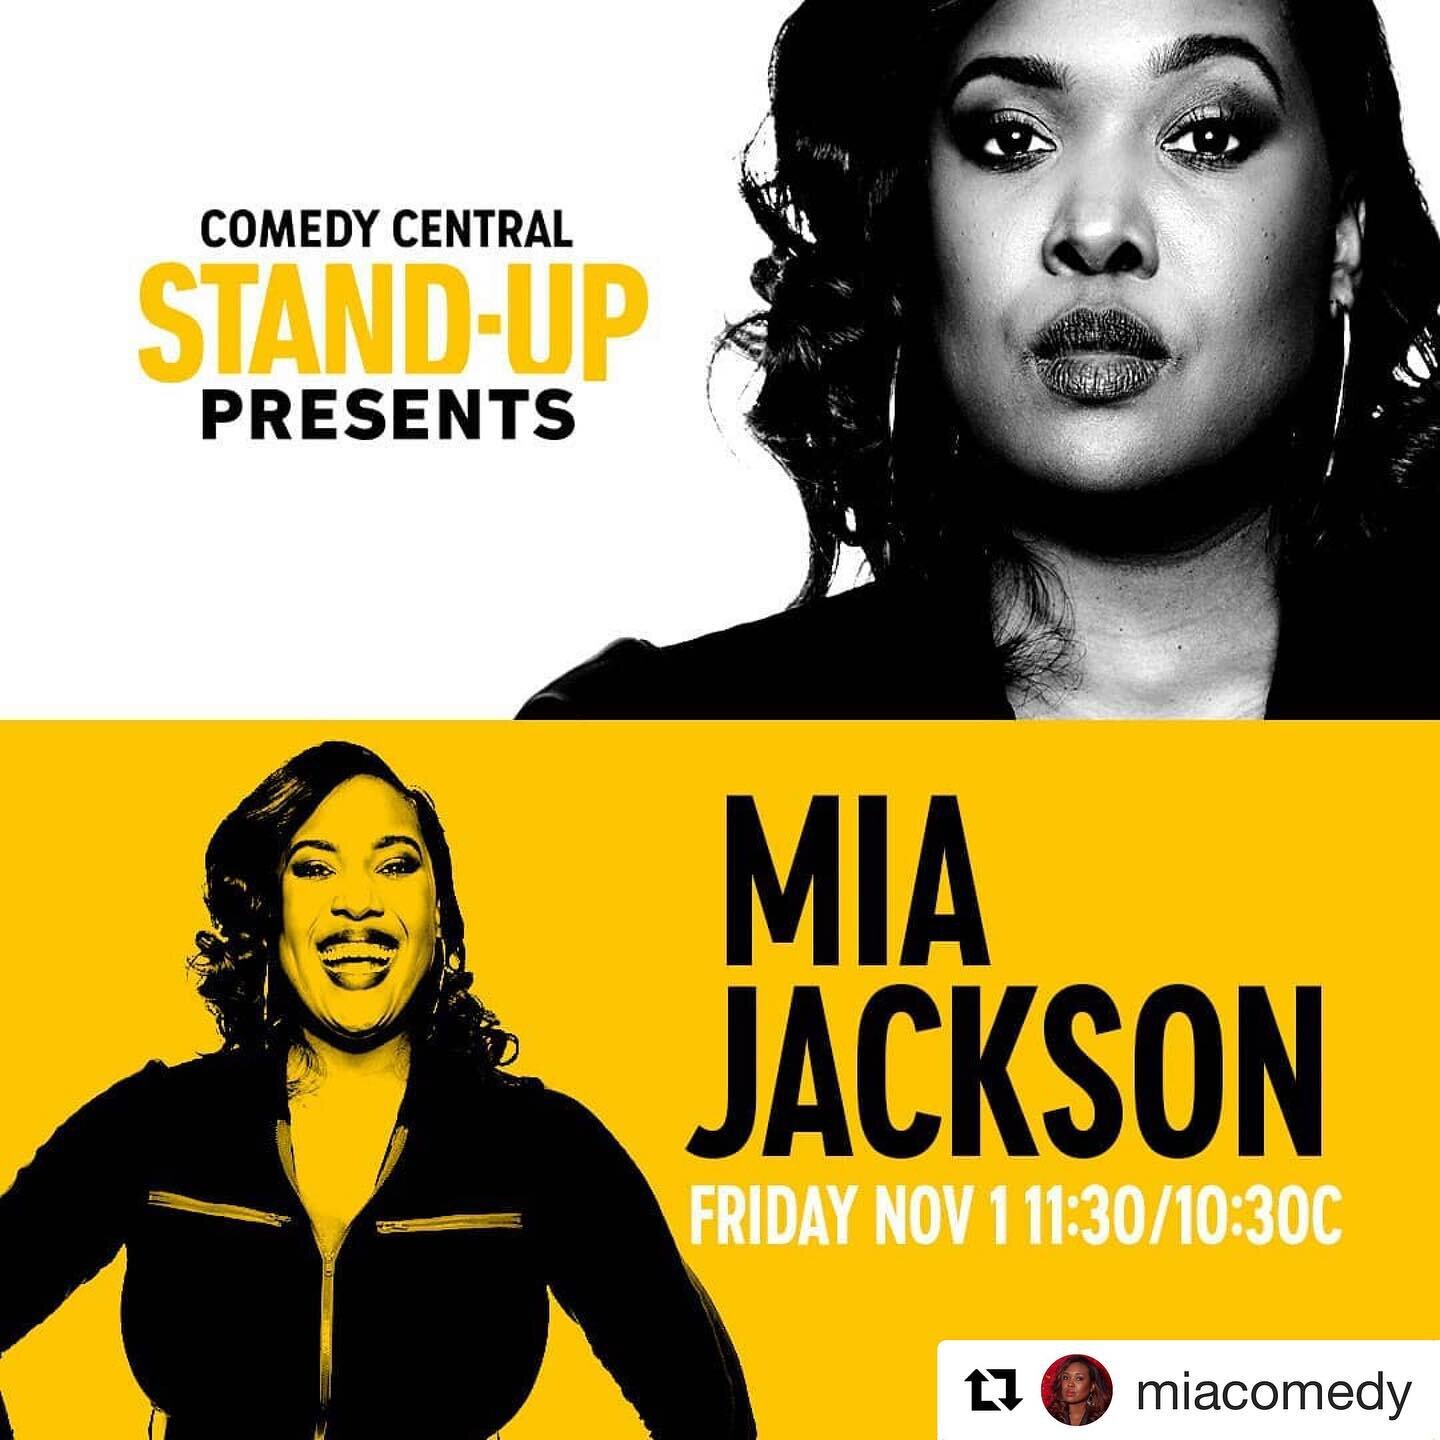 She has supported us so many times we had to return the favor. You&rsquo;ve seen her guest in a number of our shows now check her on tv! #Repost @miacomedy 
I'd be so happy if you decided to watch this tomorrow night on @comedycentral. 1130pm ET.